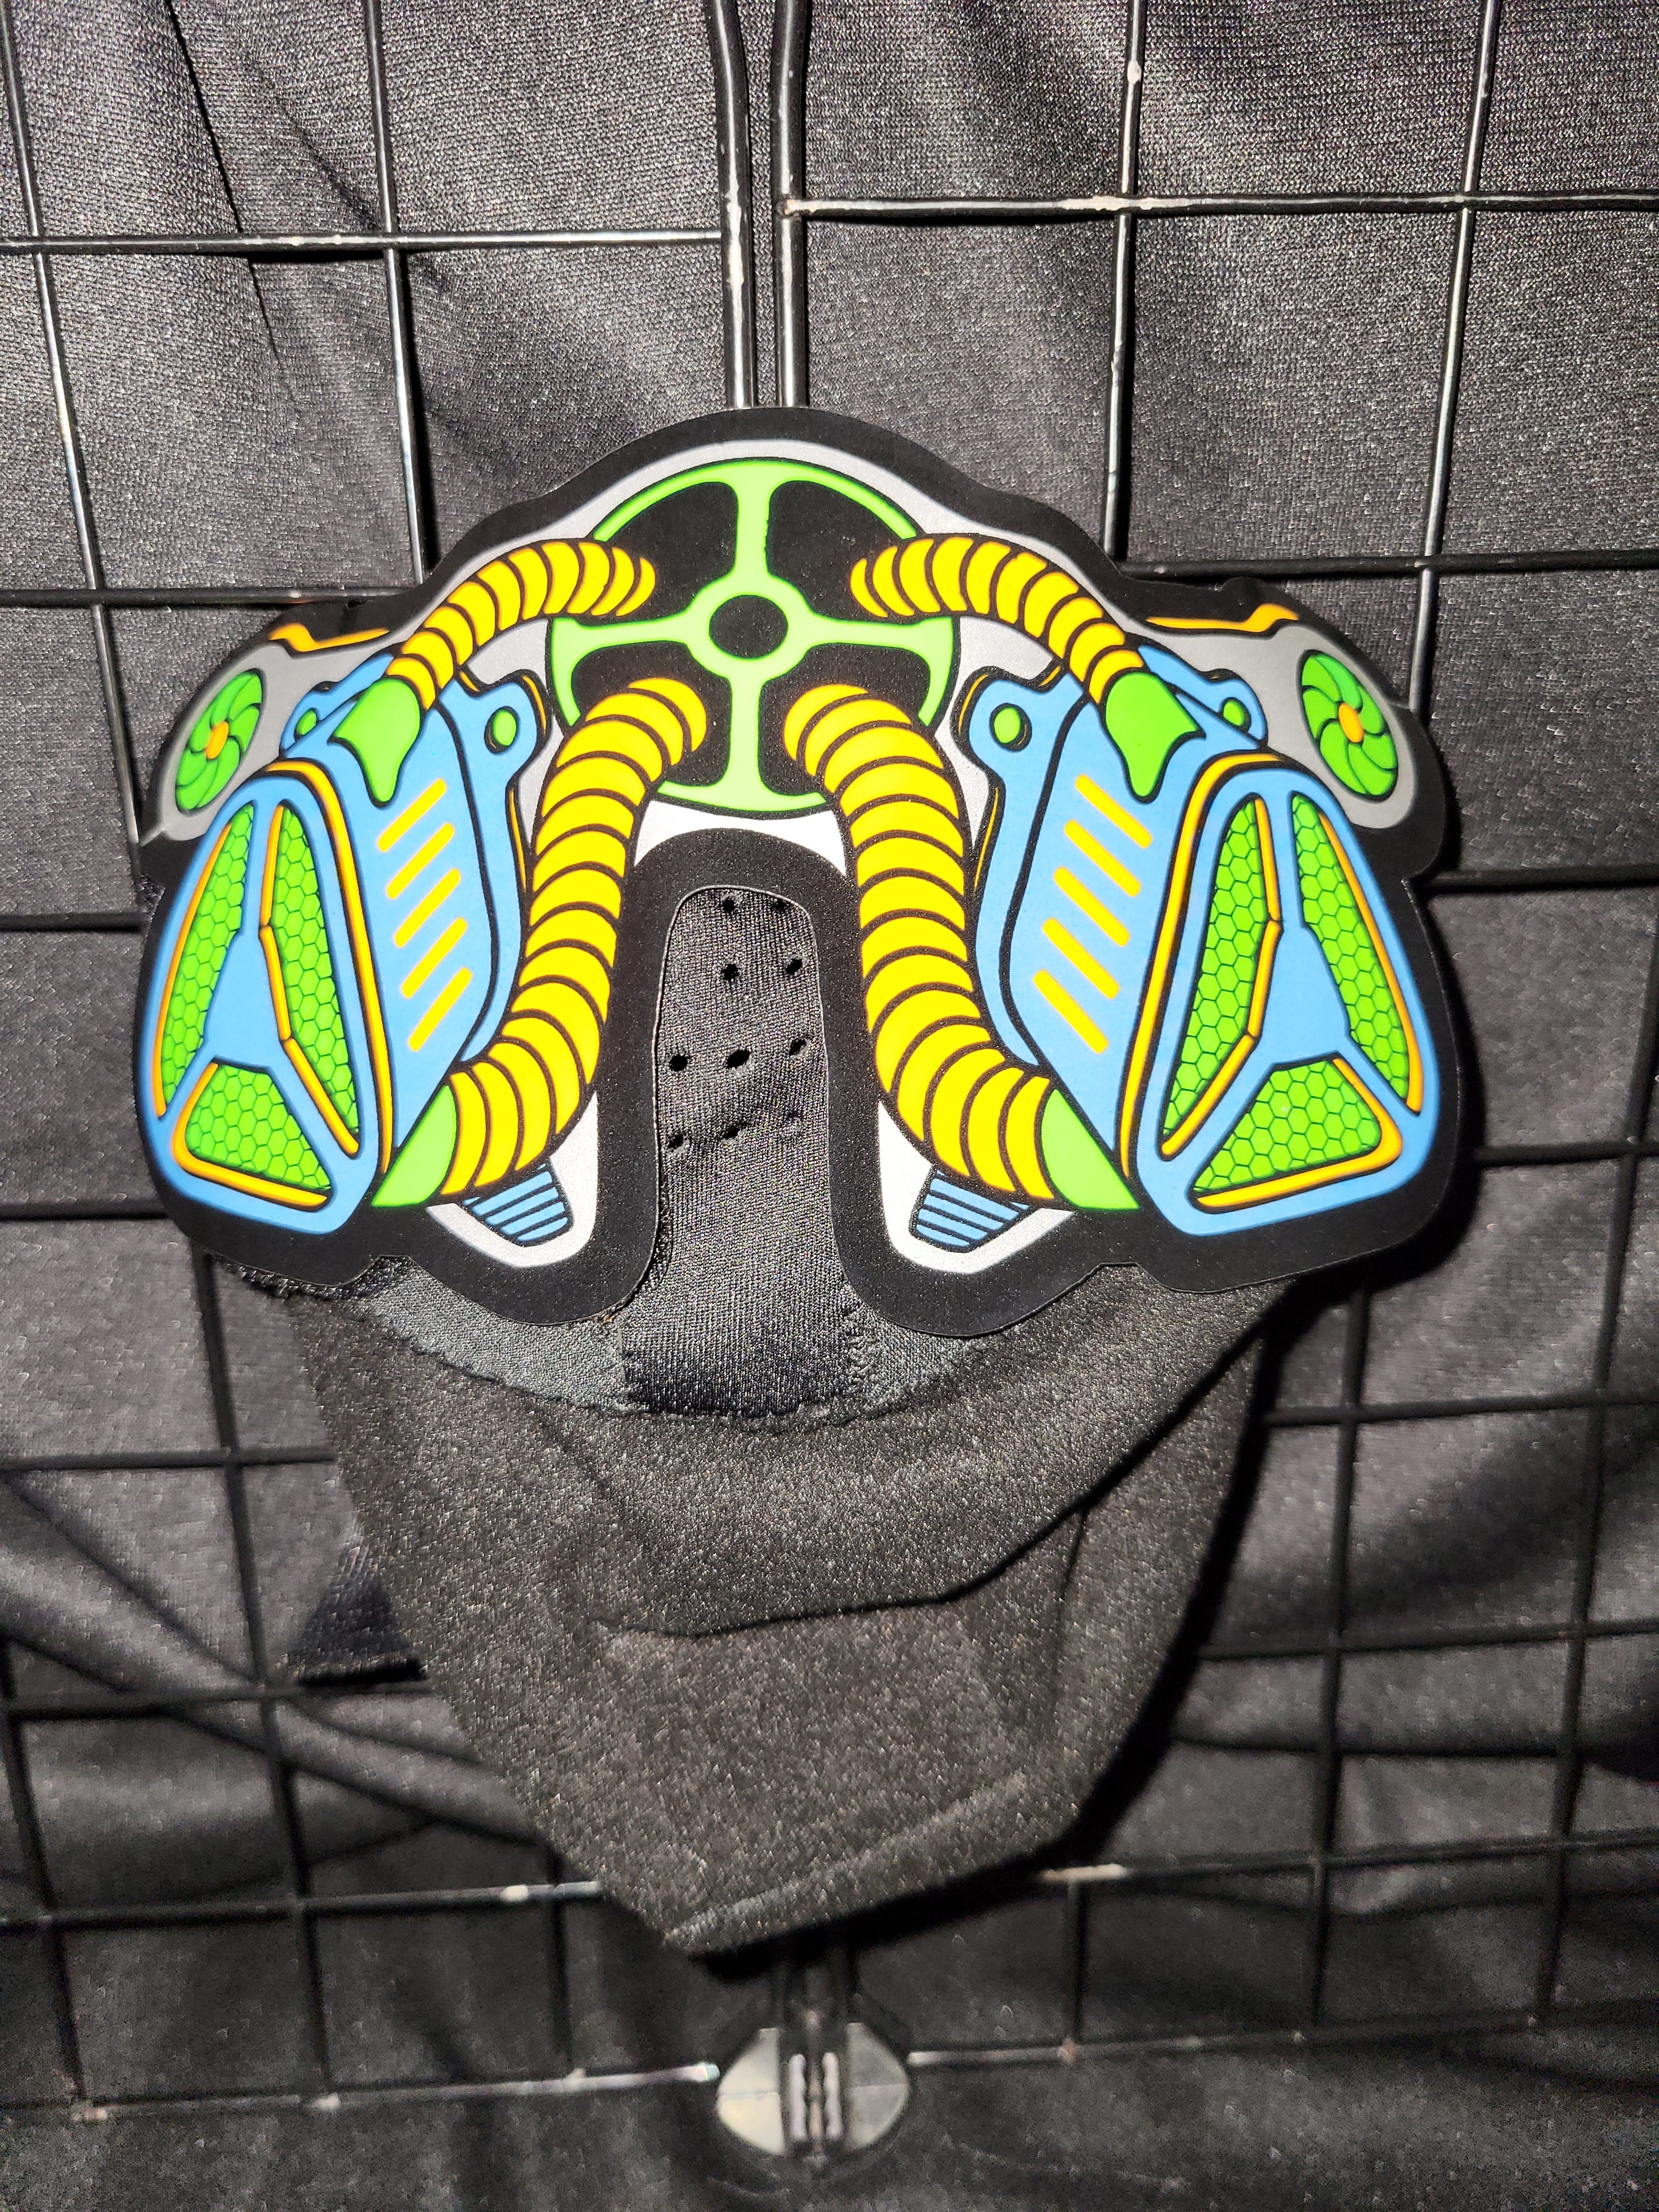 Sound activated blue green gas mask mask